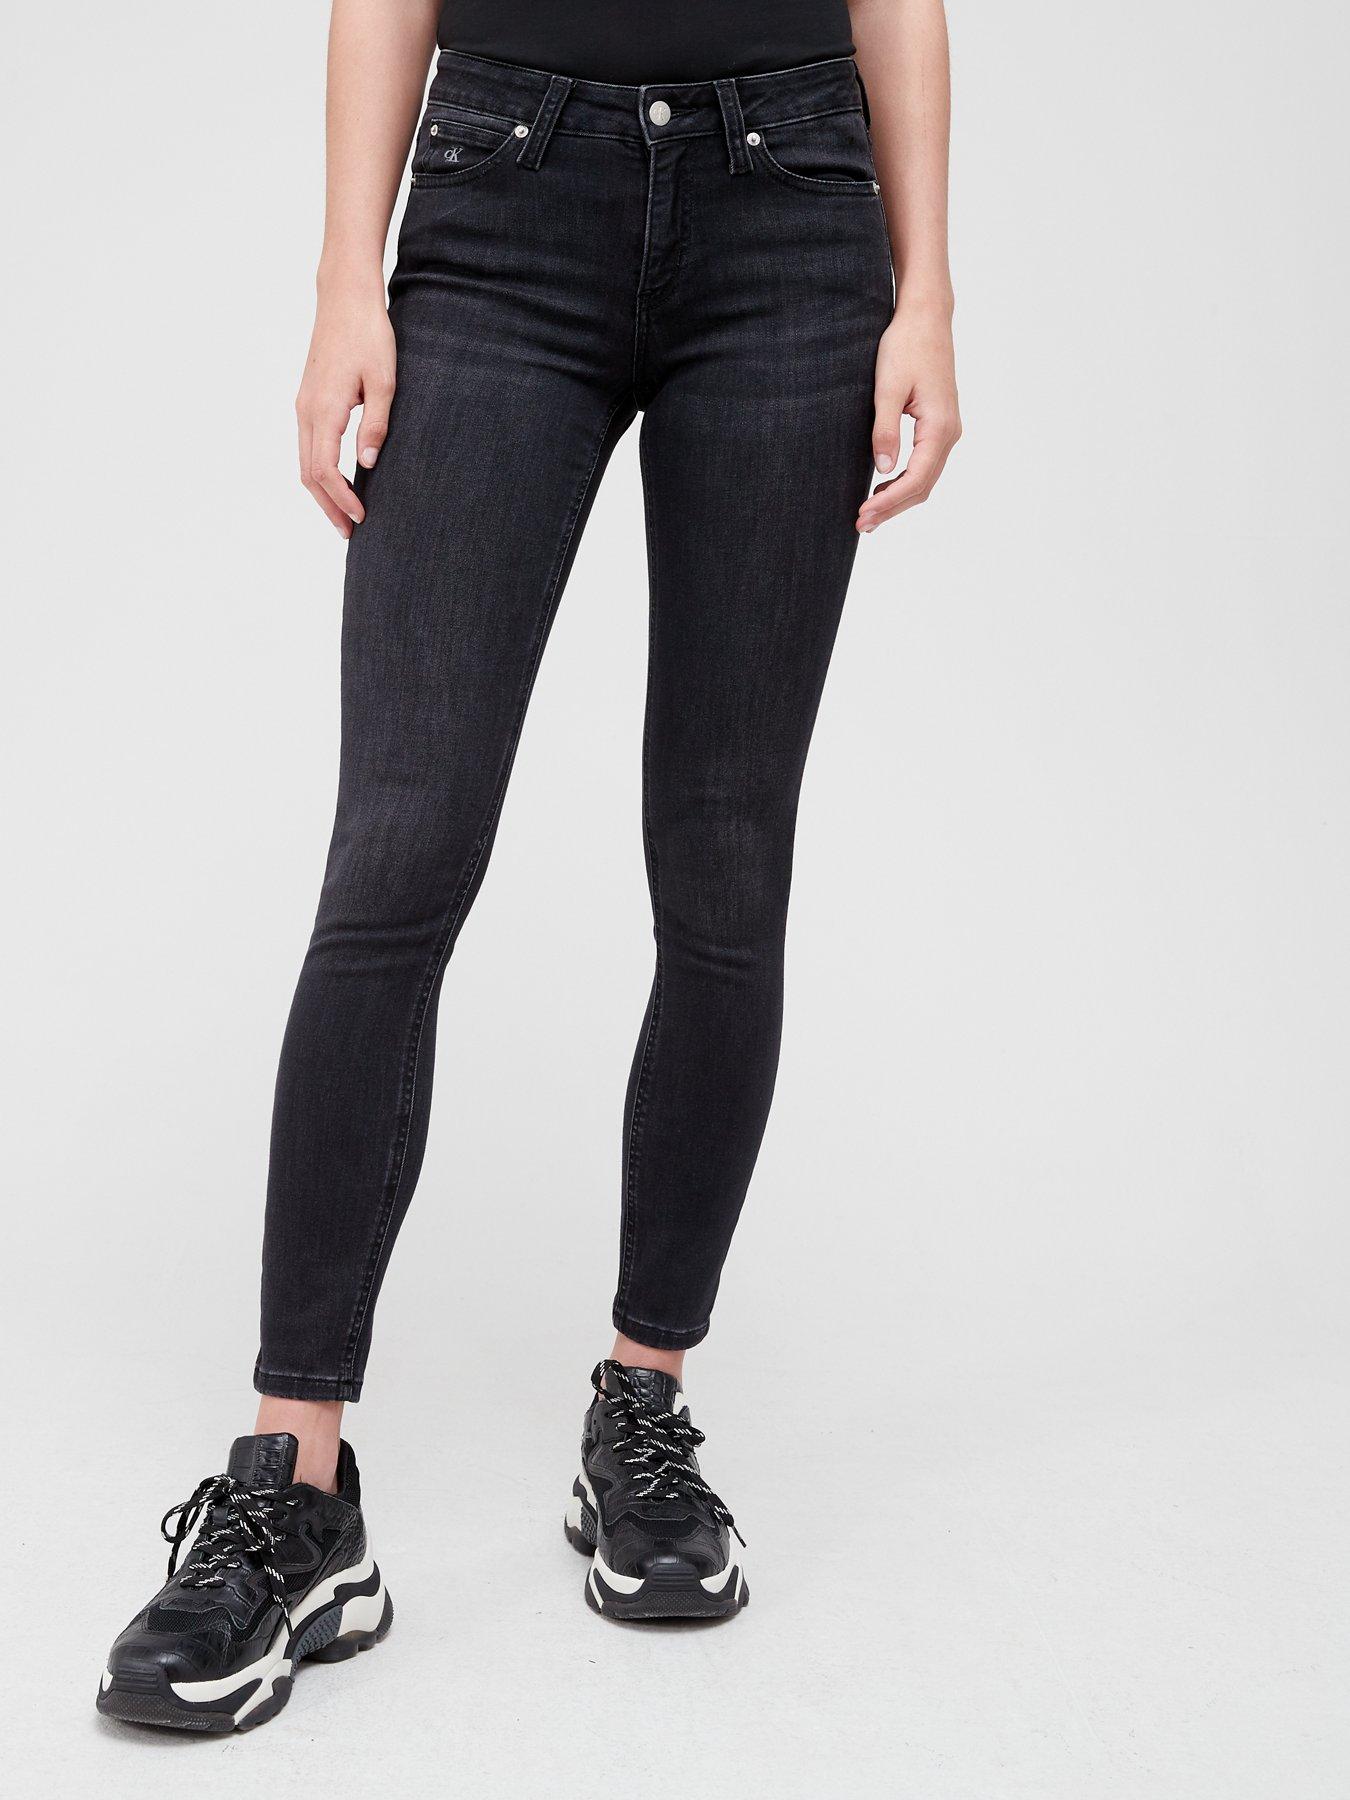  011 Mid Rise Skinny Jeans - Charcoal